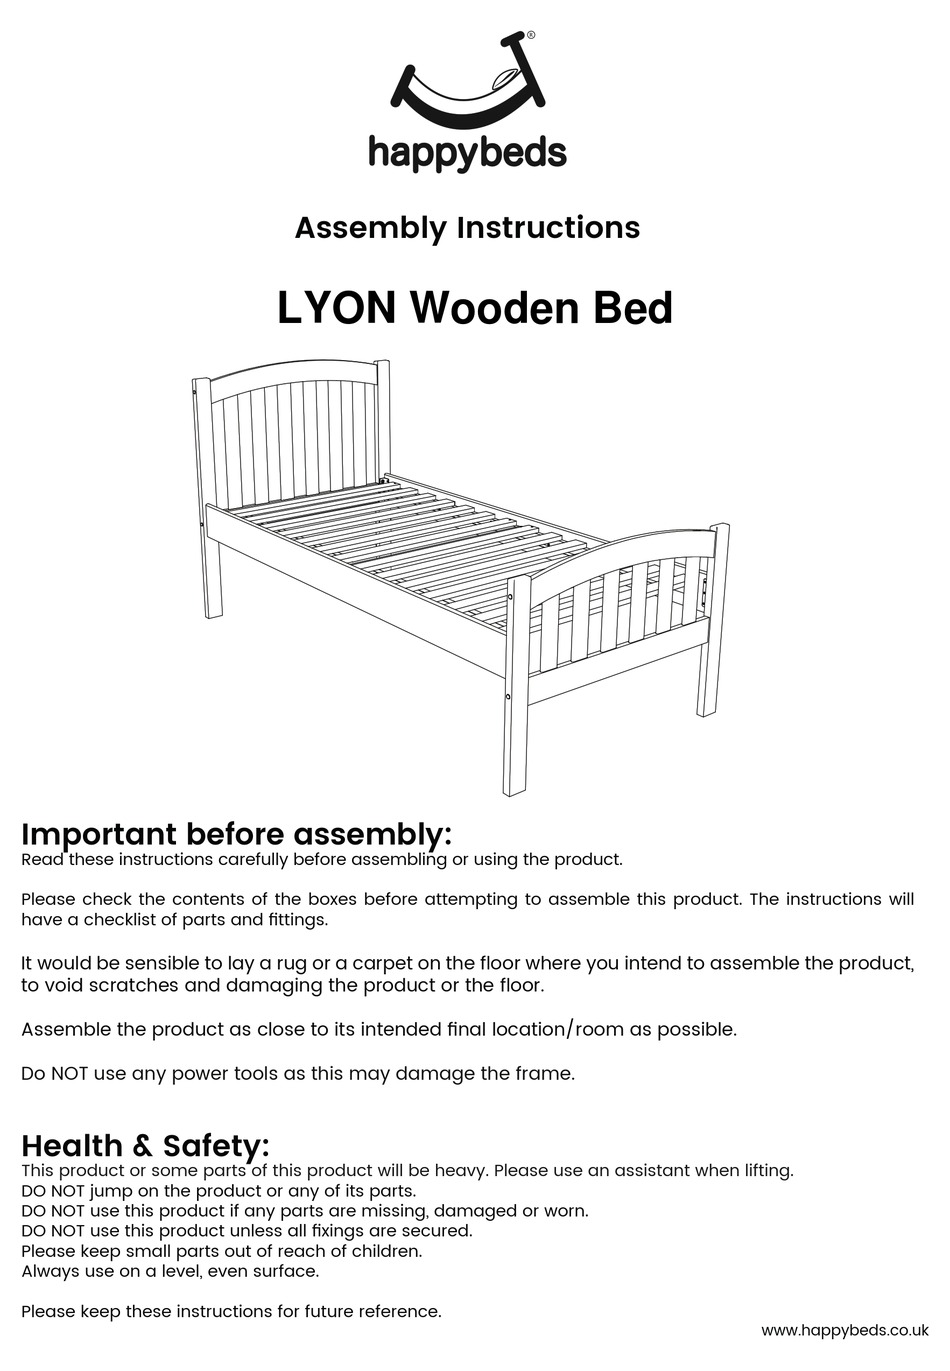 Happybeds Lyon Wooden Bed Assembly, How To Assemble A Wooden Bed Frame